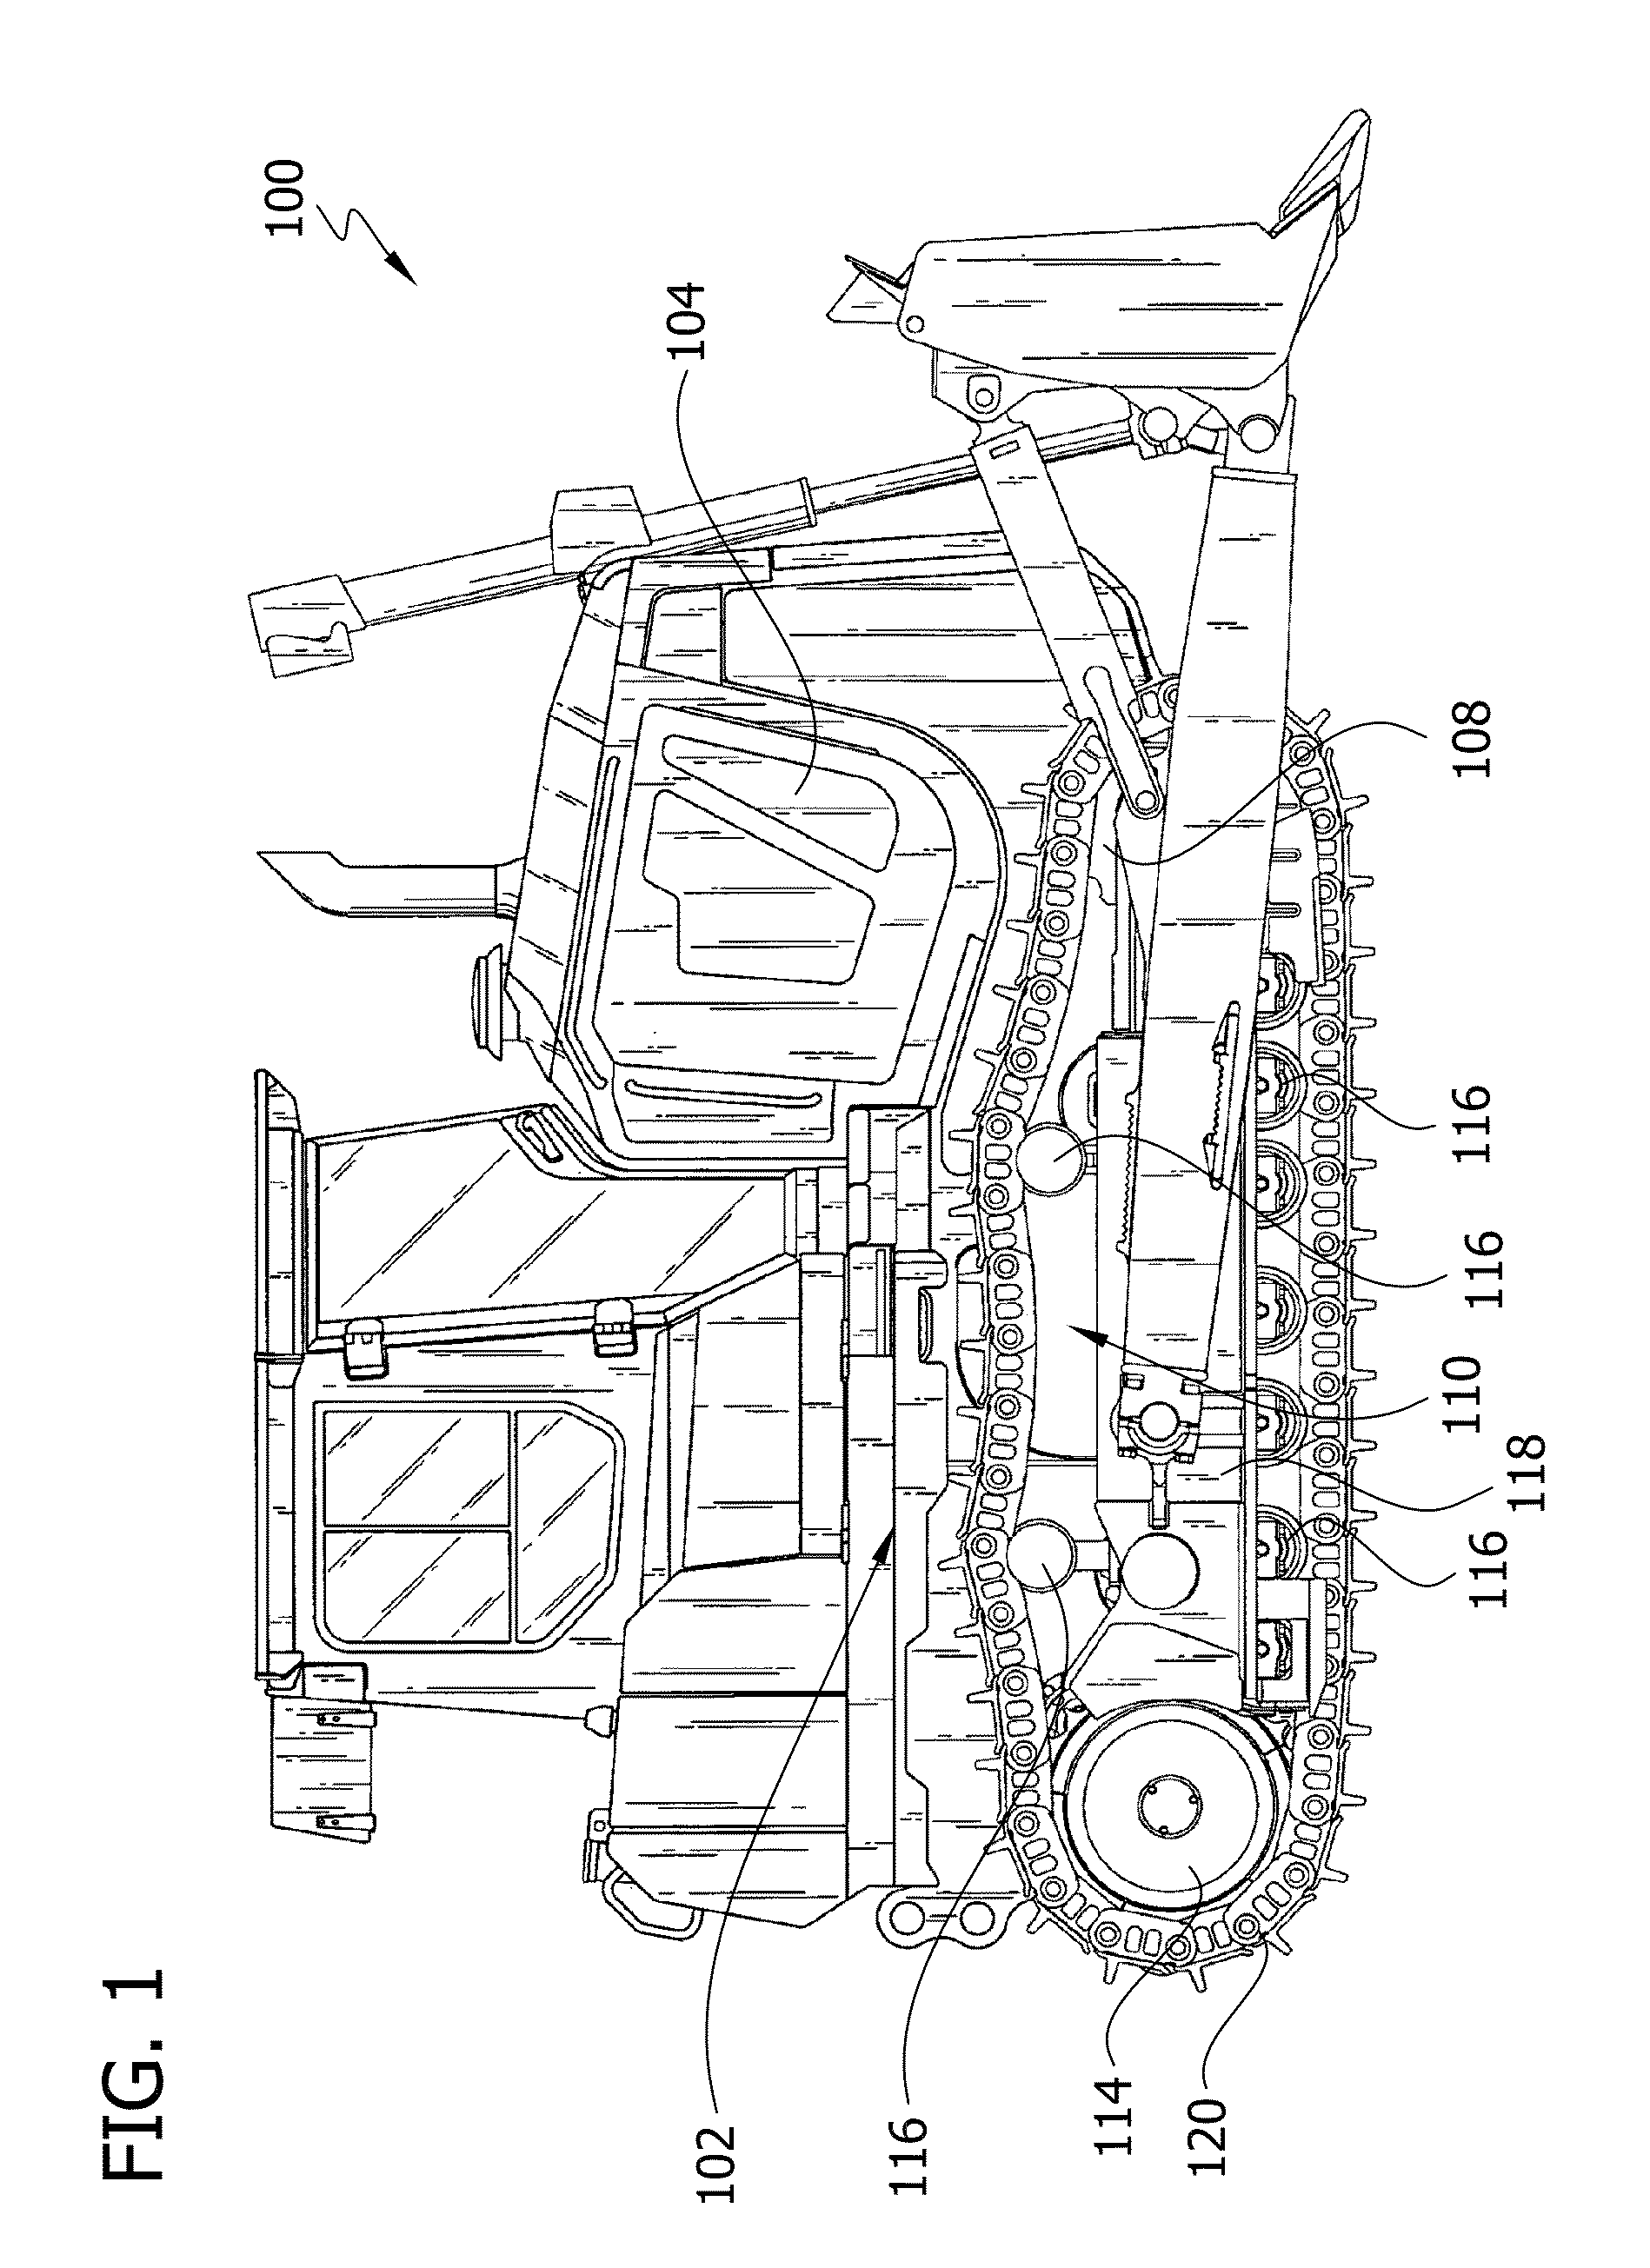 Sound Reduce Segmented Idler For Track-Type Vehicles